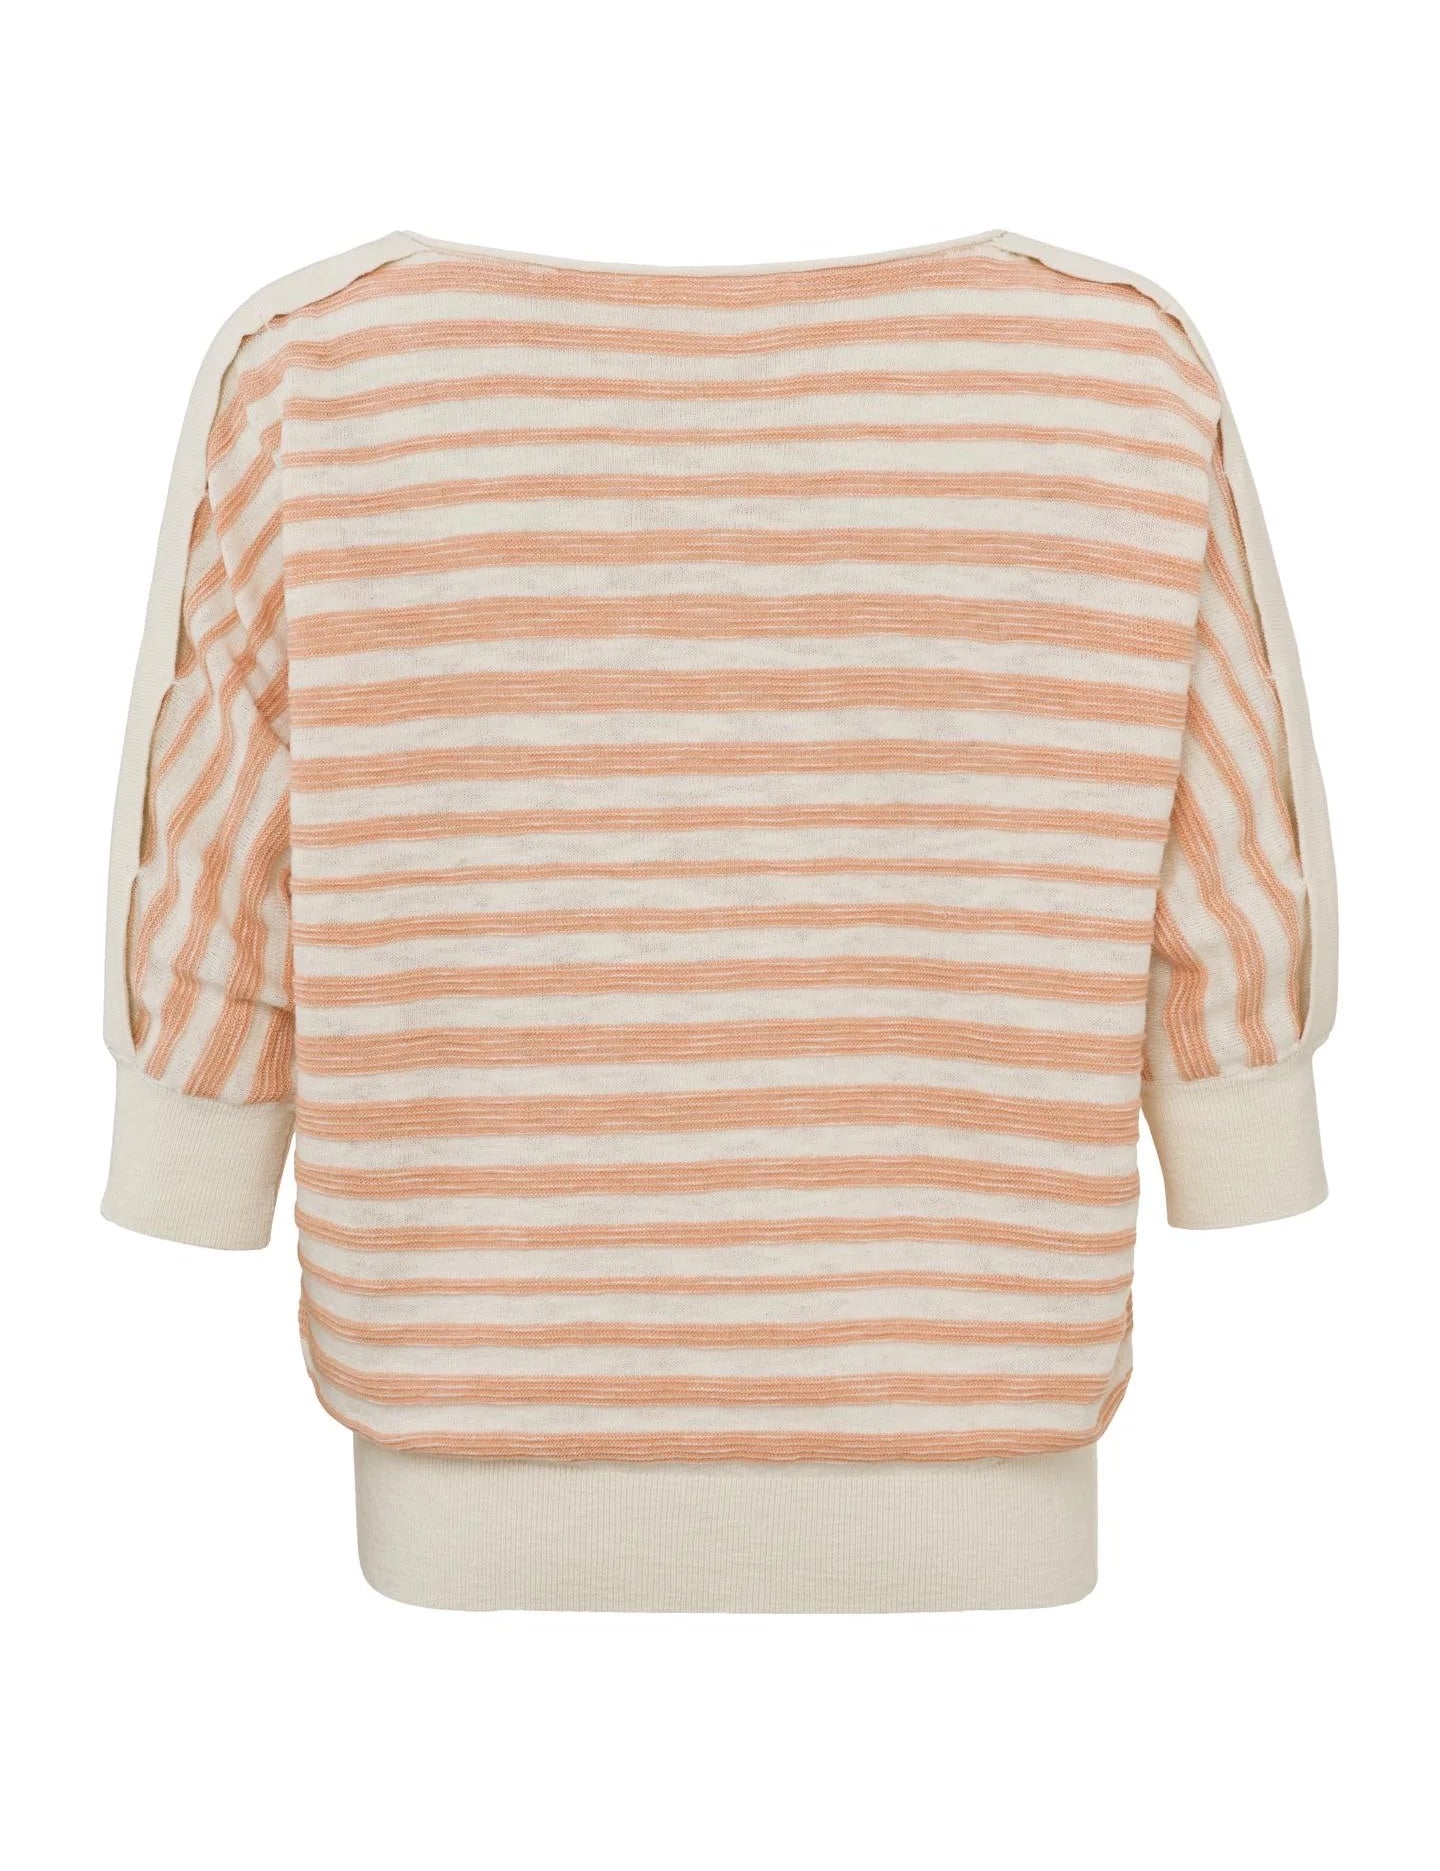 batwing-sweater-with-boatneck-half-long-sleeves-and-stripes-dusty-coral-orange-dessin_68ee2ebe-2bc7-462c-86f0-9d07562d5921_2880x_jpg.jpg